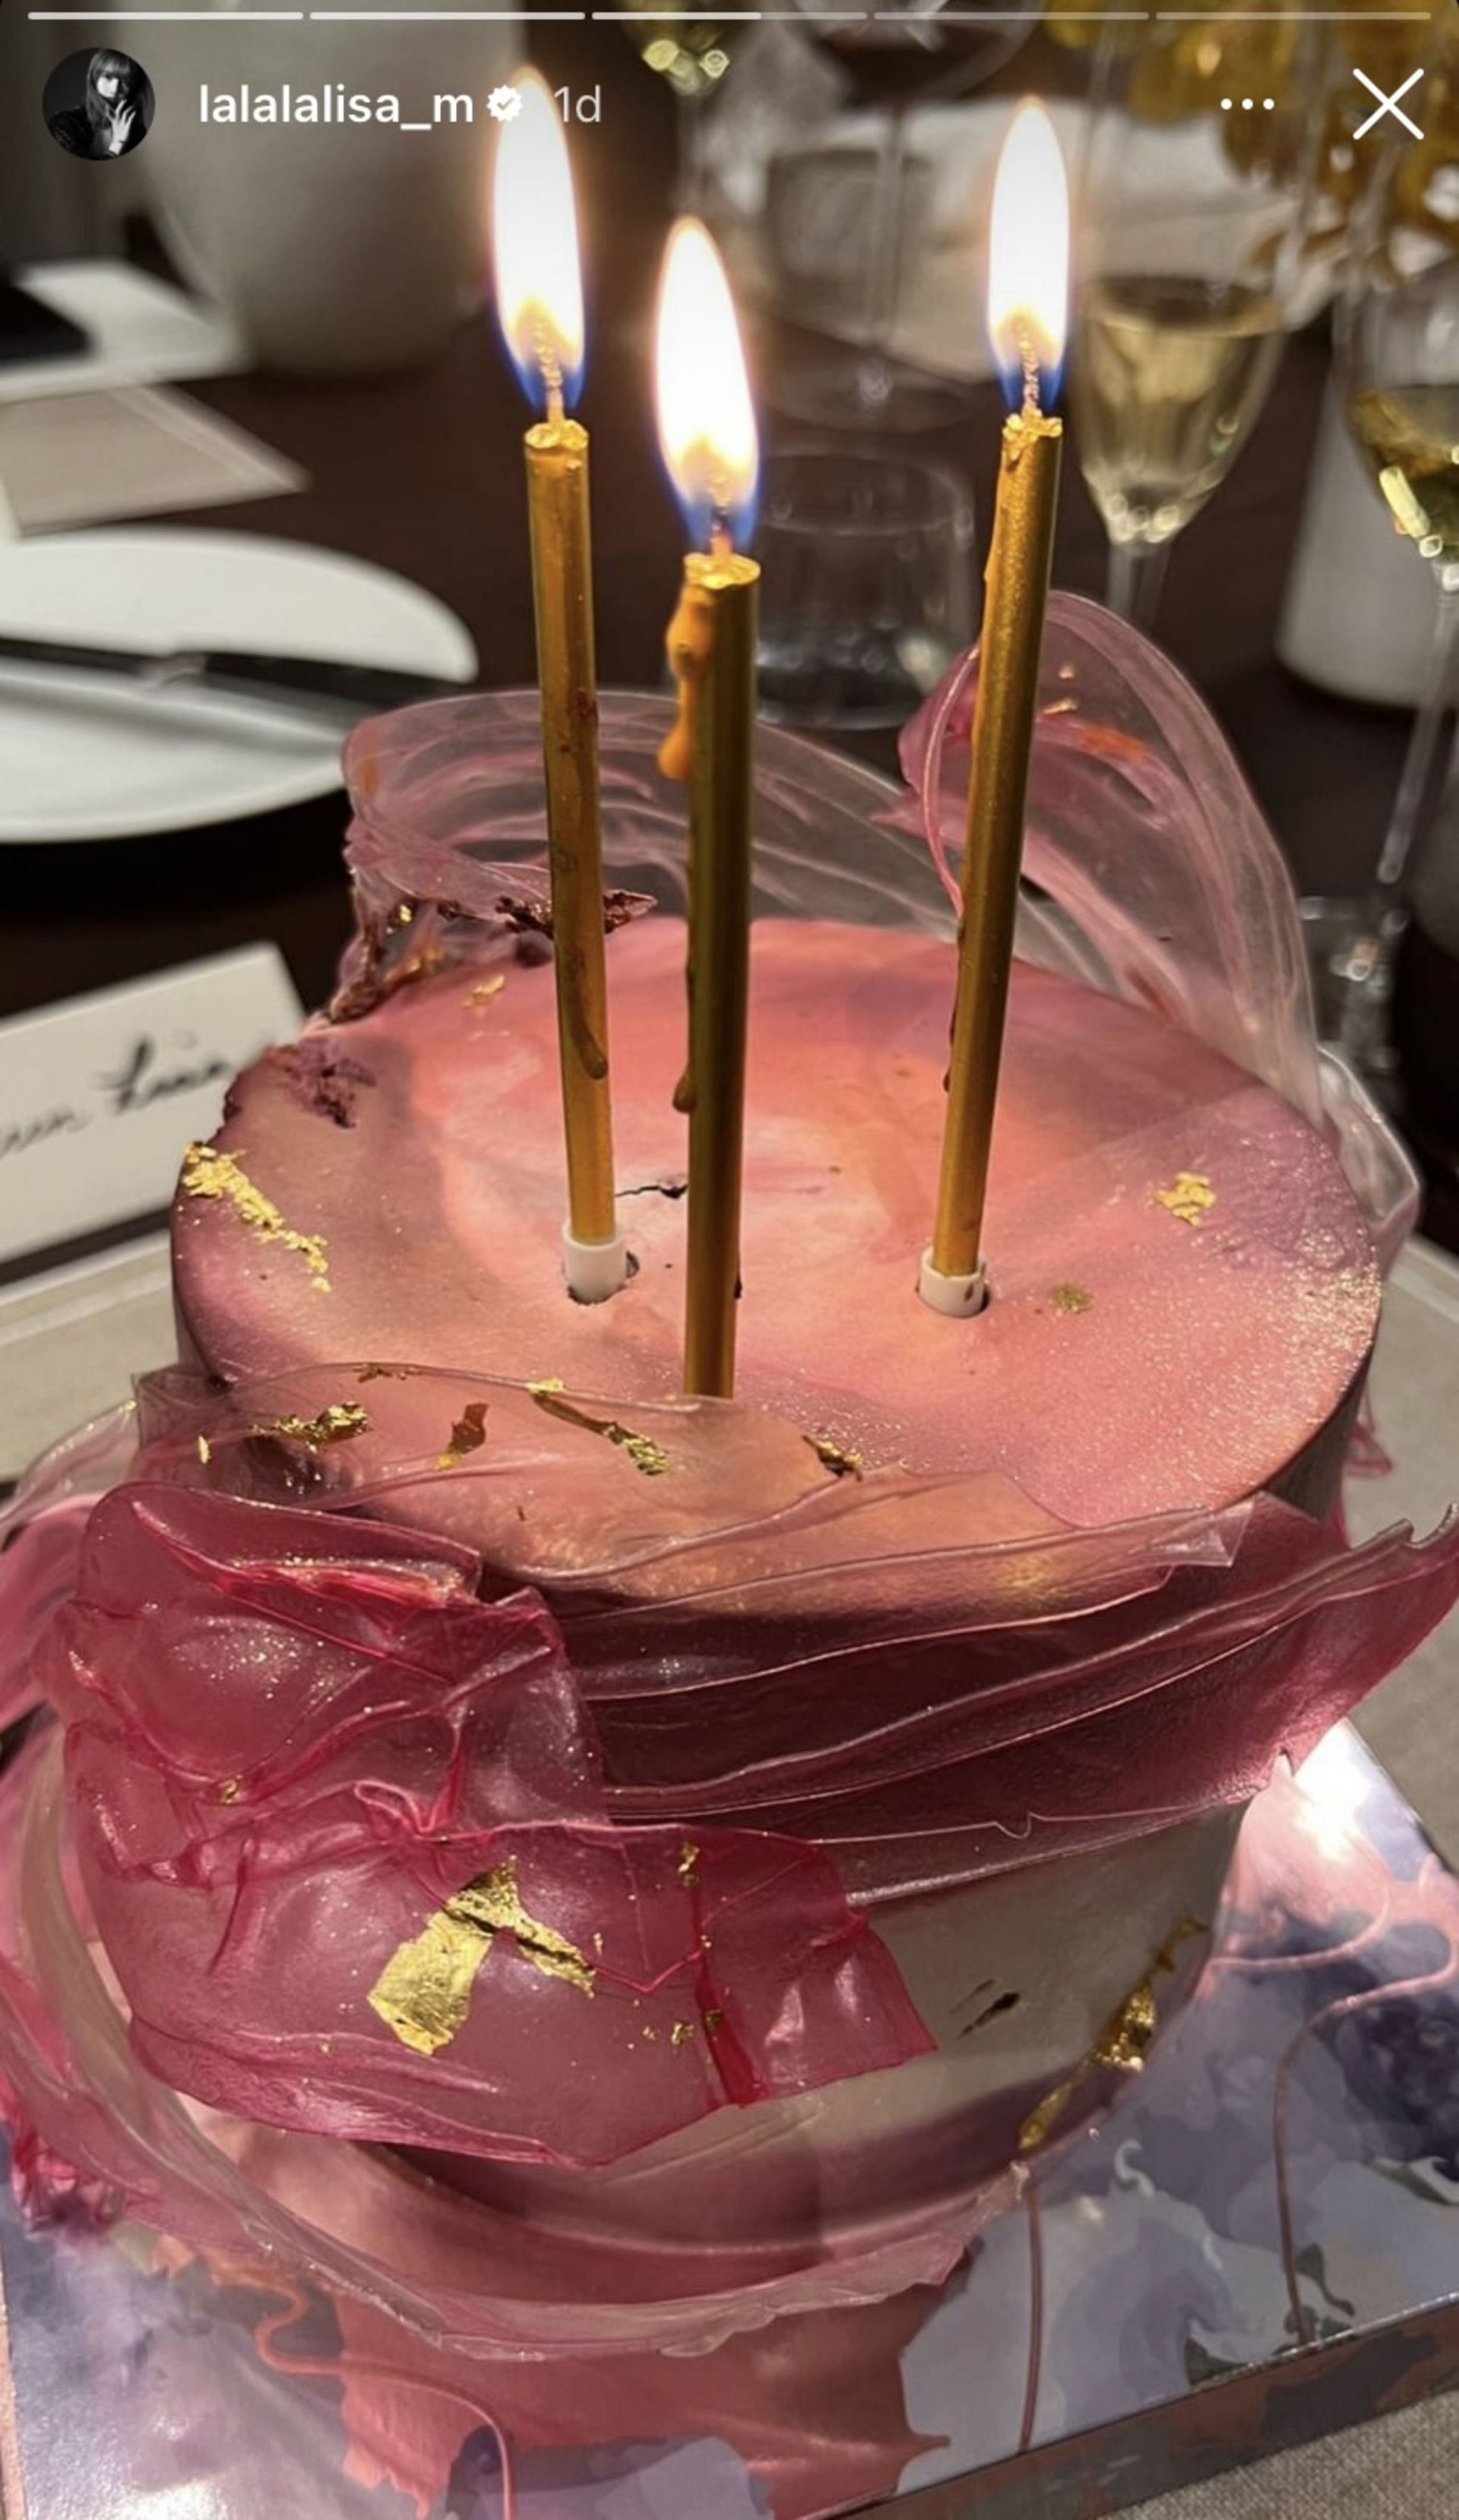 Lisa&#039;s pretty pink-colored cake with gold dust (Image via lalalalisa_m/Instagram)